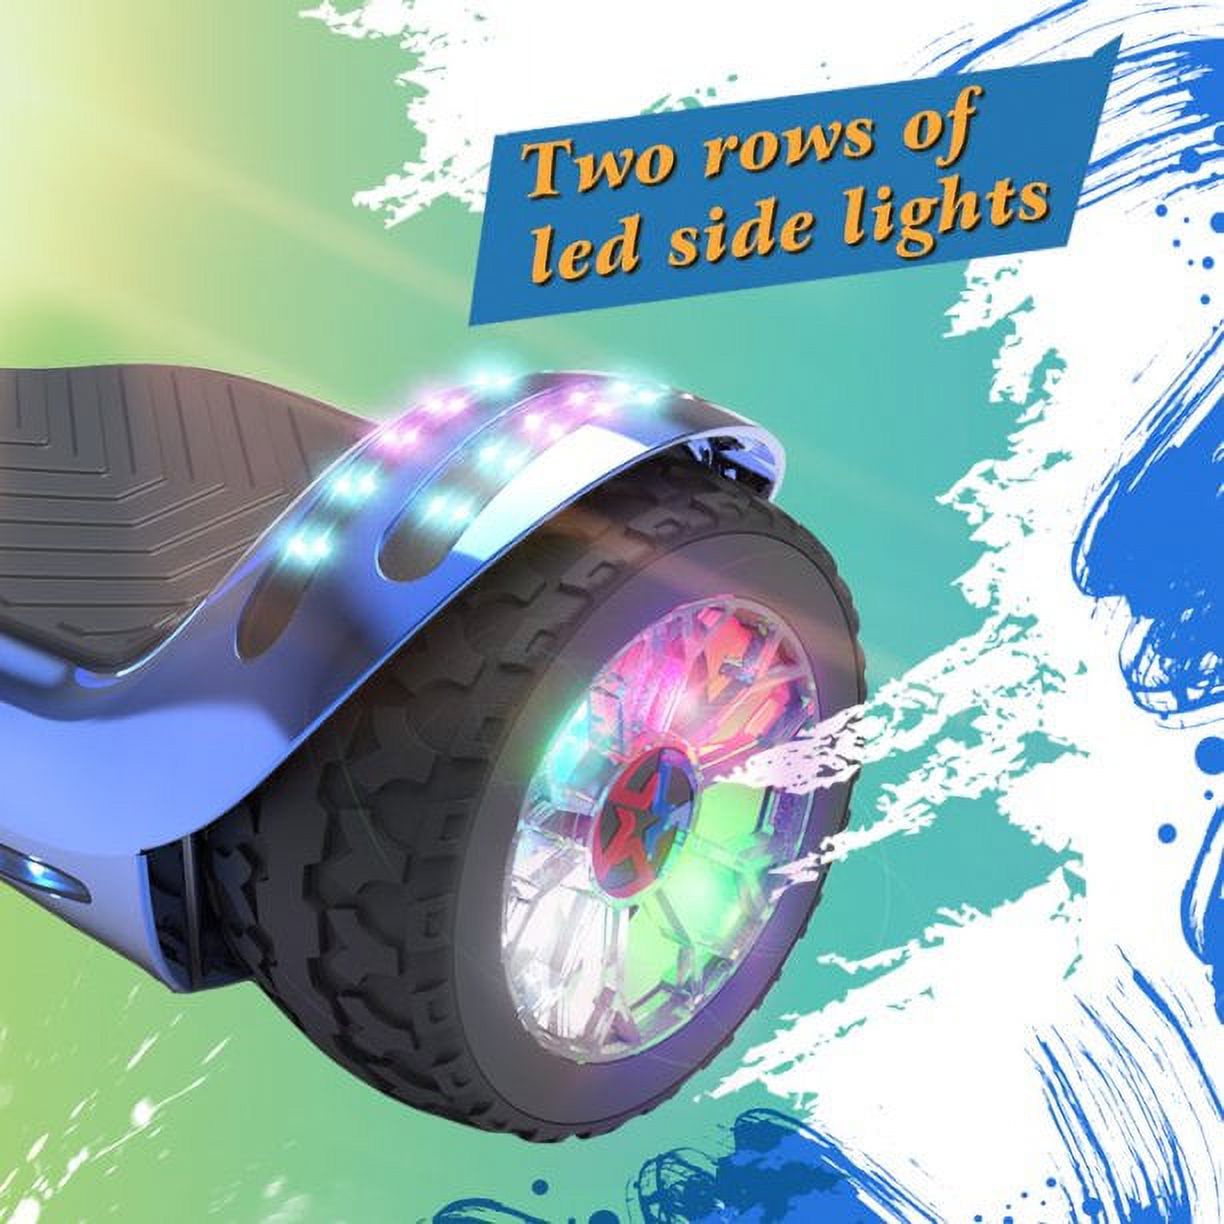 Hoverboard All-Terrain LED Flash Wide All Terrian Wheel with Bluetooth Speaker Dual LED Light Self Balancing Wheel Electric Scooter Chrome Blue - image 2 of 5